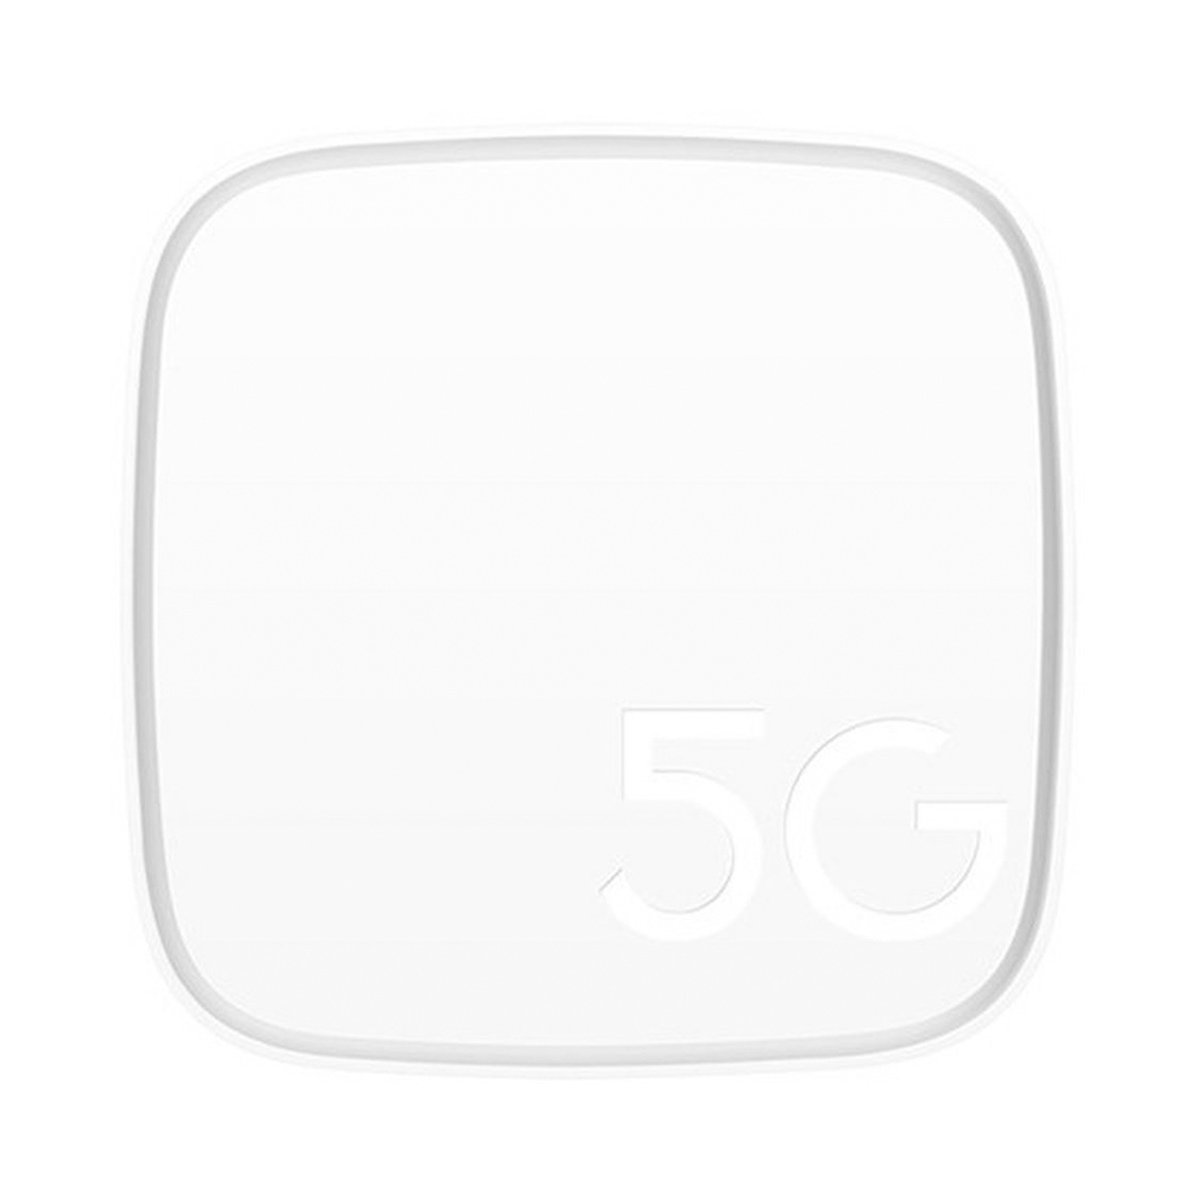 Huawei 5G Router H112-372 White